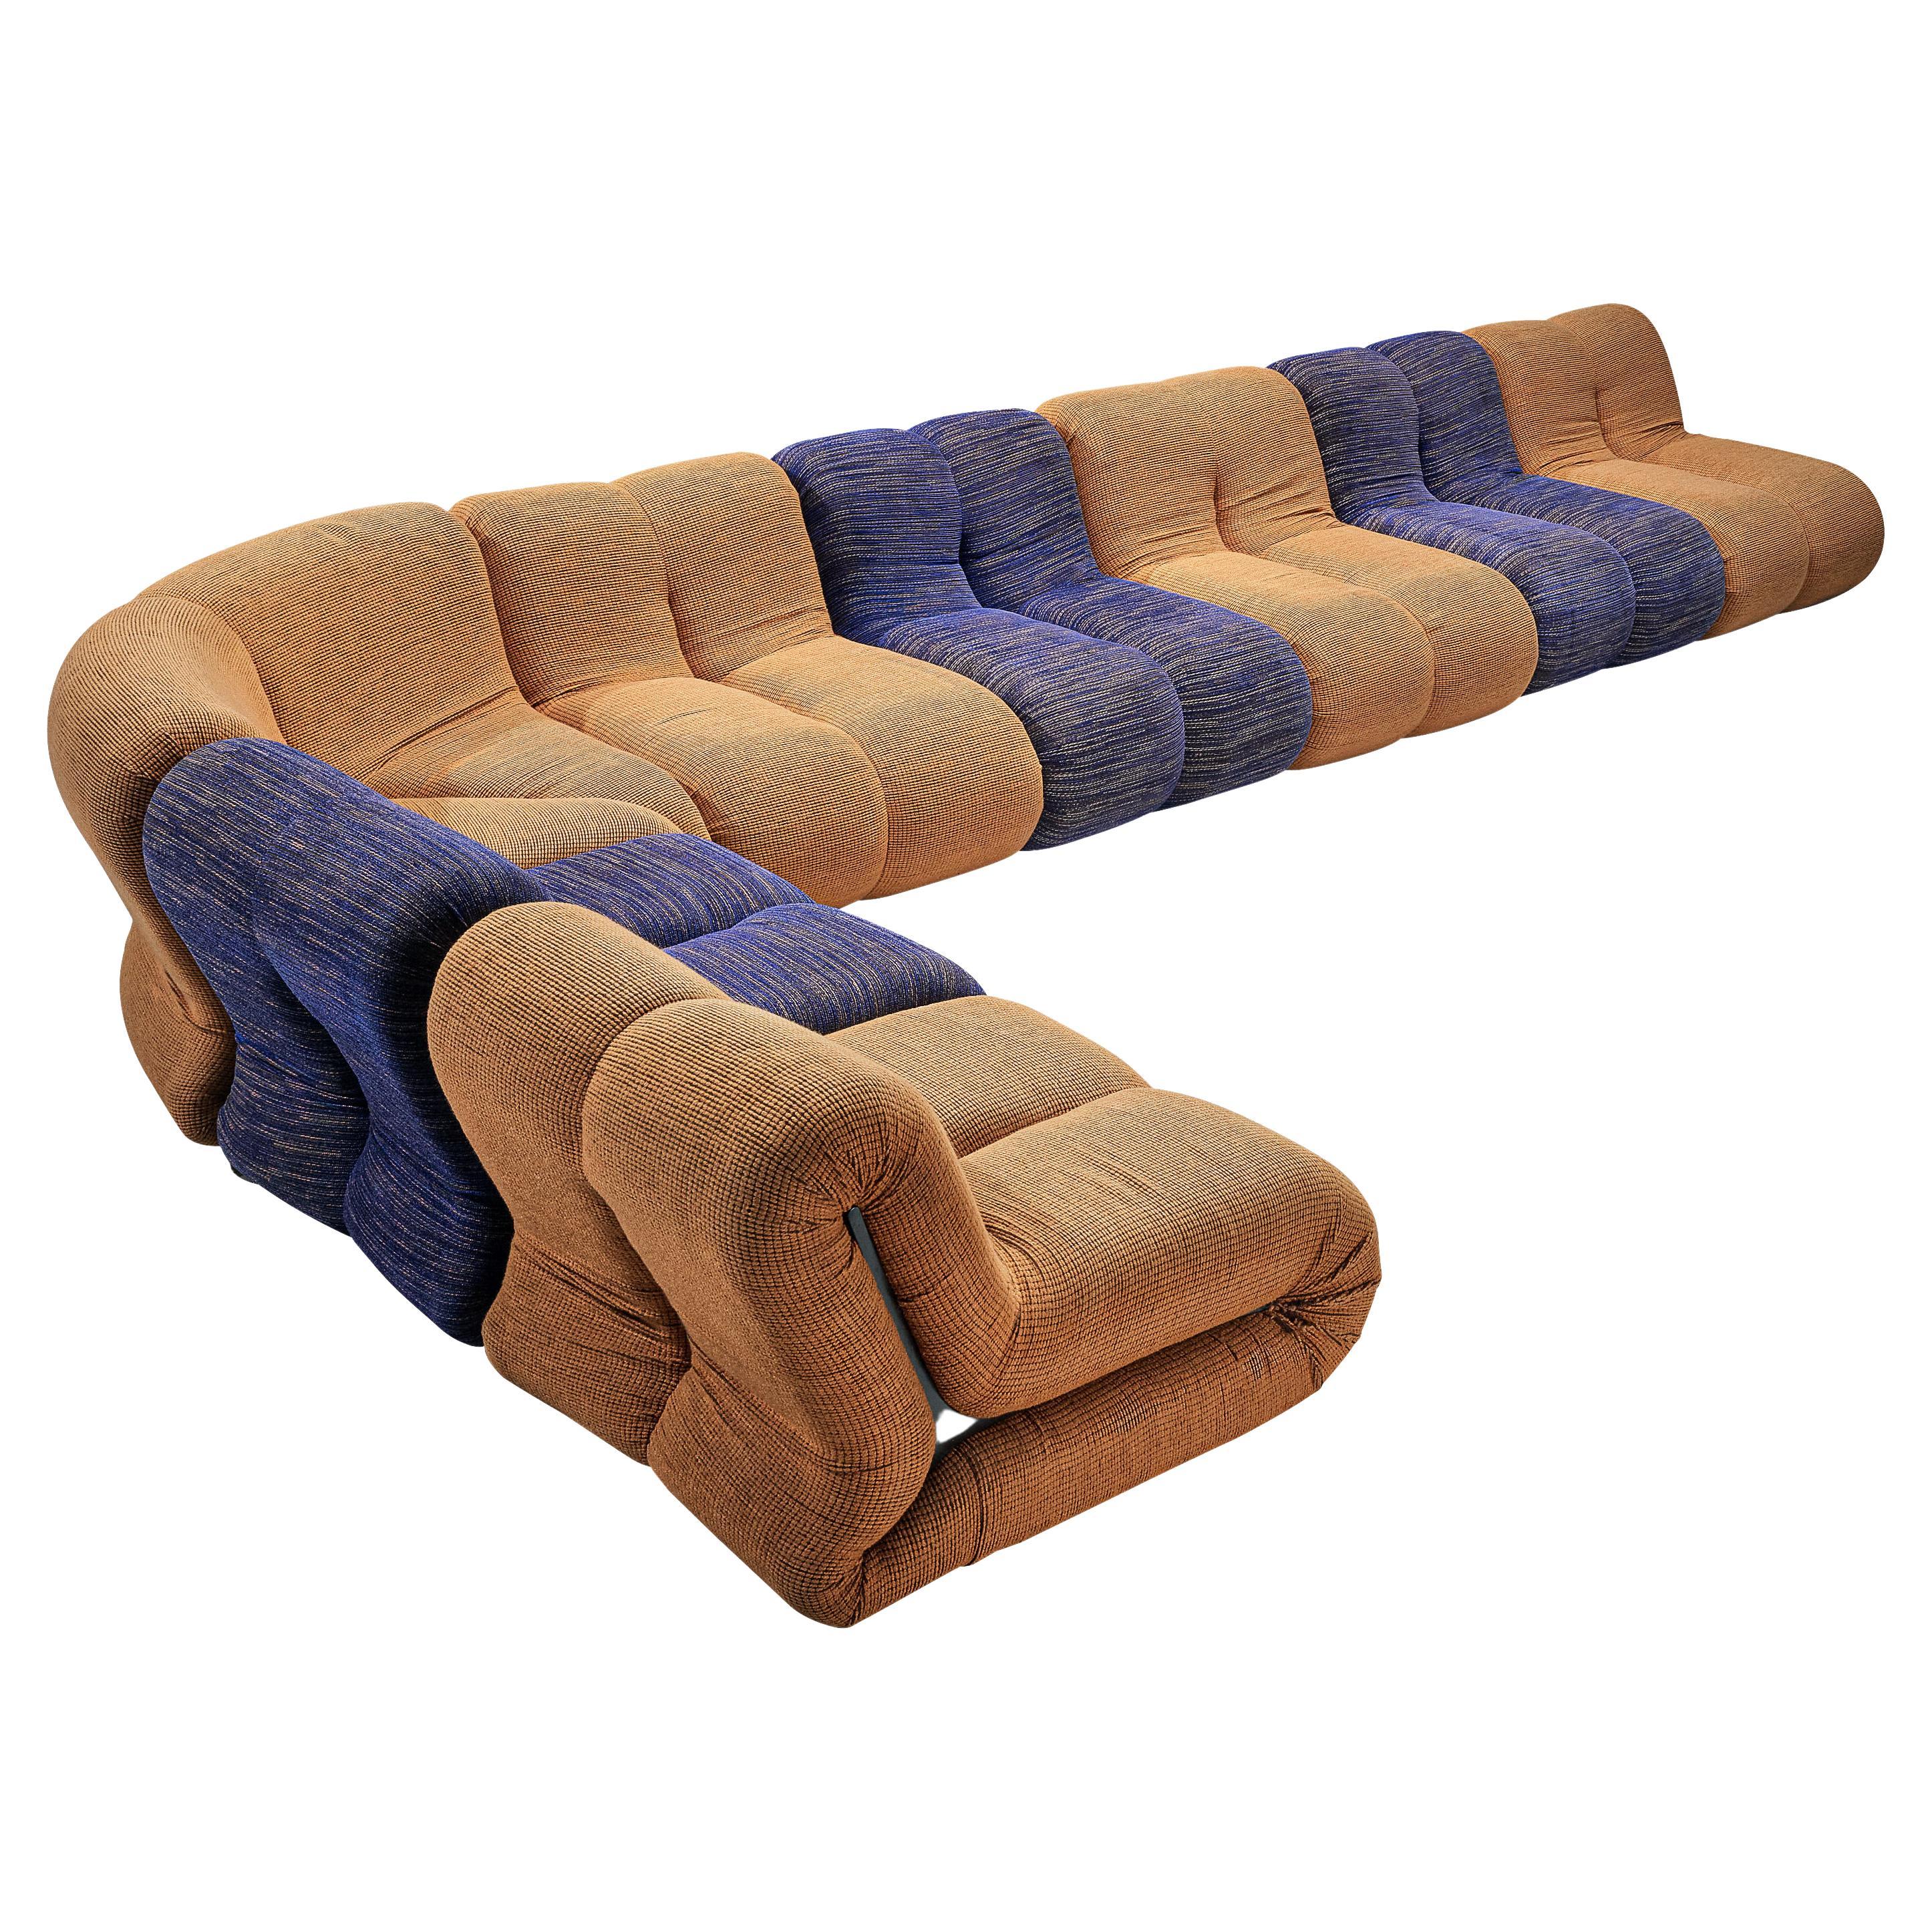 Claudio Vagnoni for 1P 'Pagru' Modular Sofa in Blue and Brown Upholstery